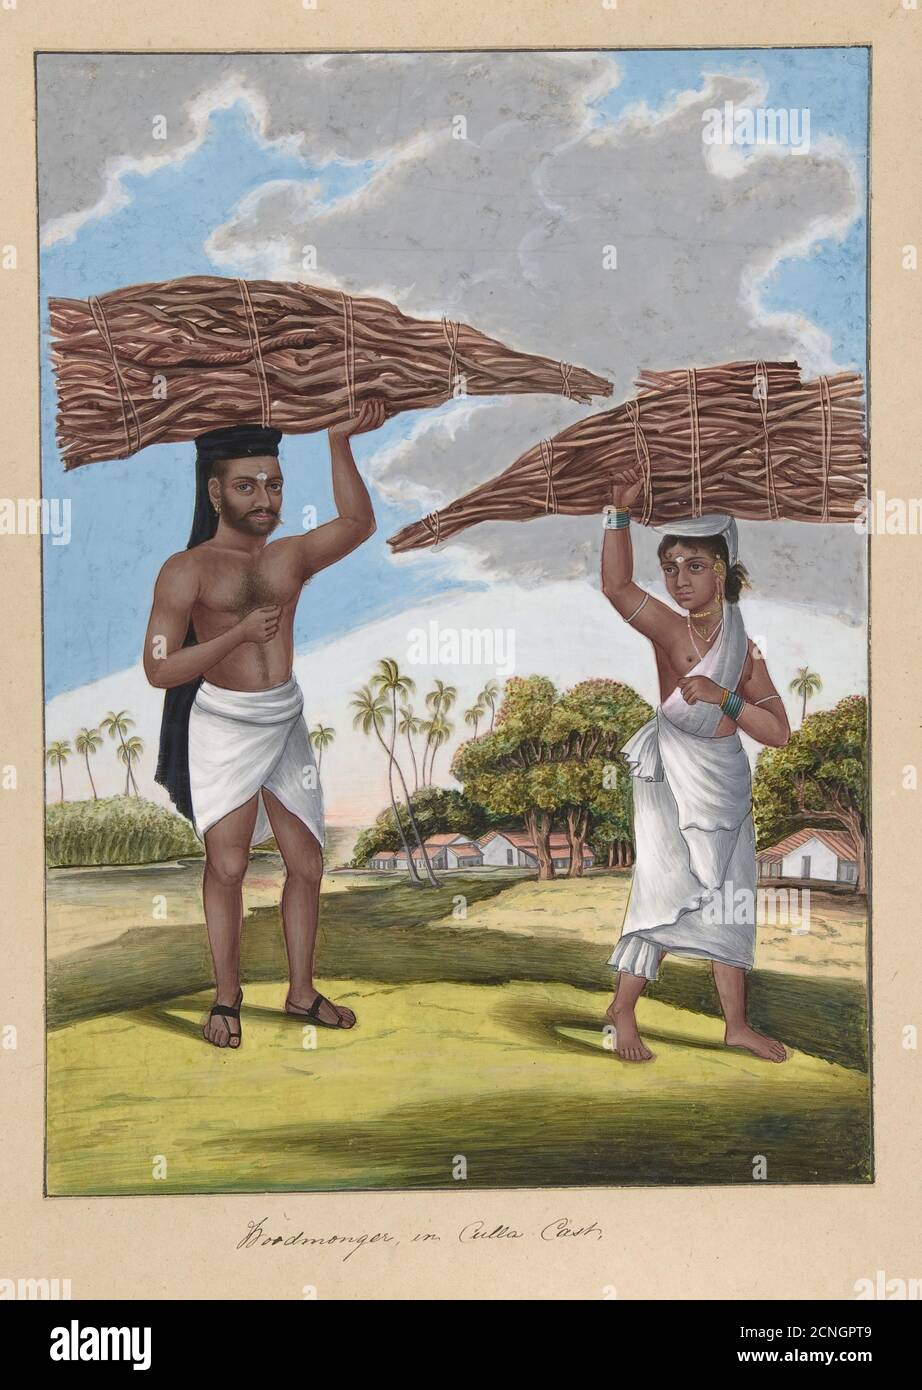 Woodmonger in Culla Caste, from Indian Trades and Castes, ca. 1840. Stock Photo